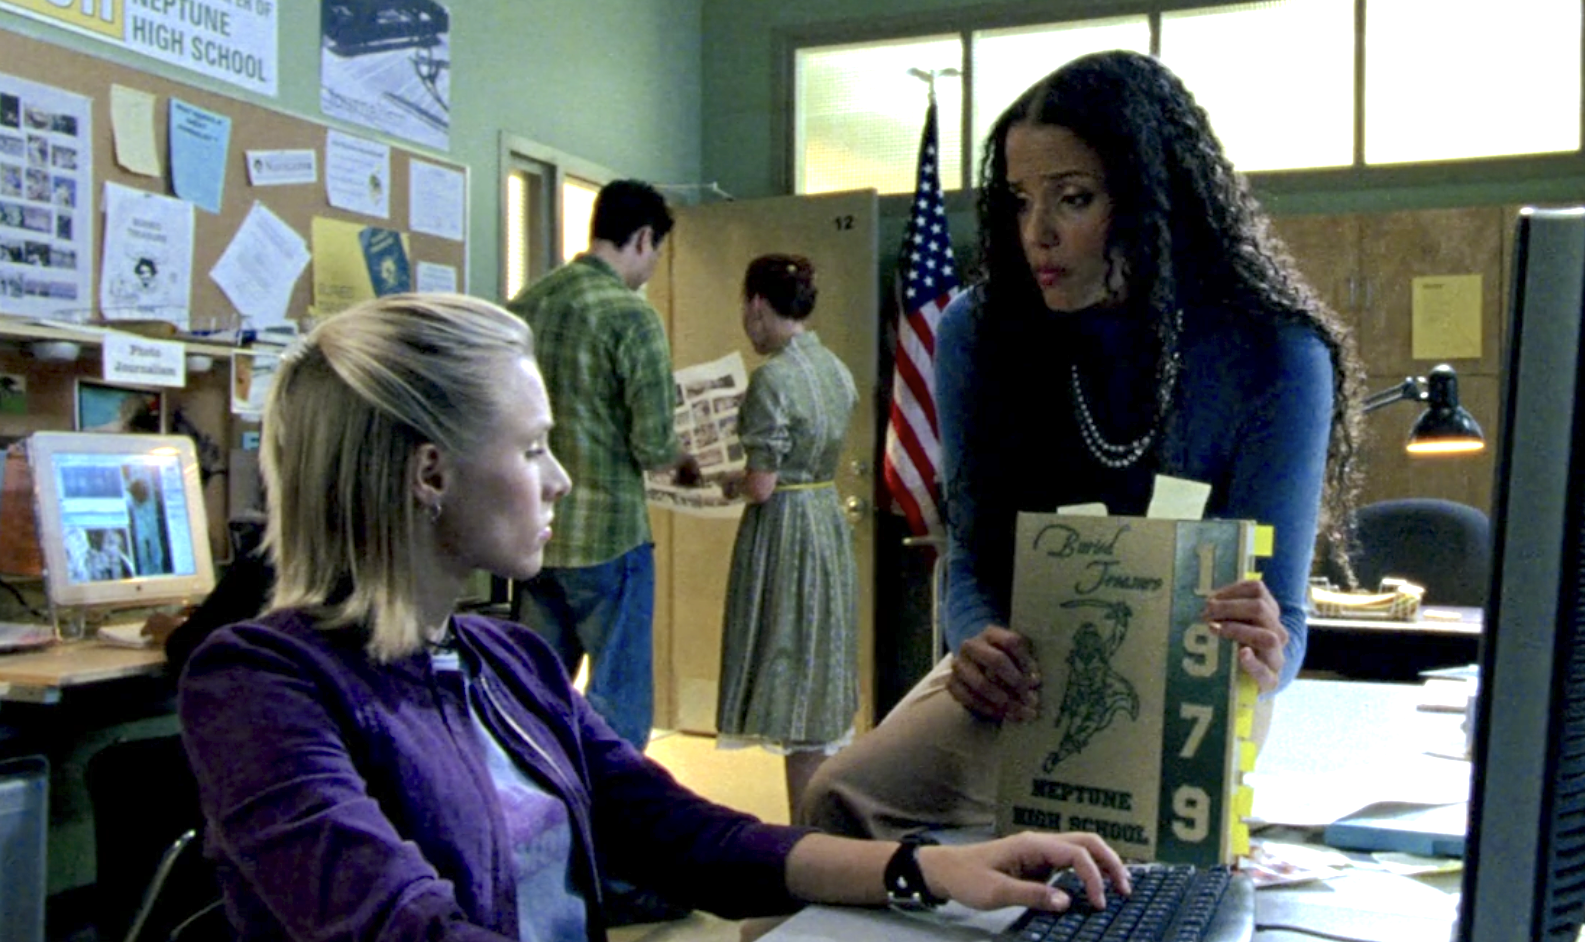 A screenshot of S1E7 of Veronica Mars. Veronica is seated in a classroom at a computer in a purple jacket. She's looking to her side at Ms. Dent who is sitting beside her on the table holding up the 1979 Neptune High School yearbook called "Buried Treasure."